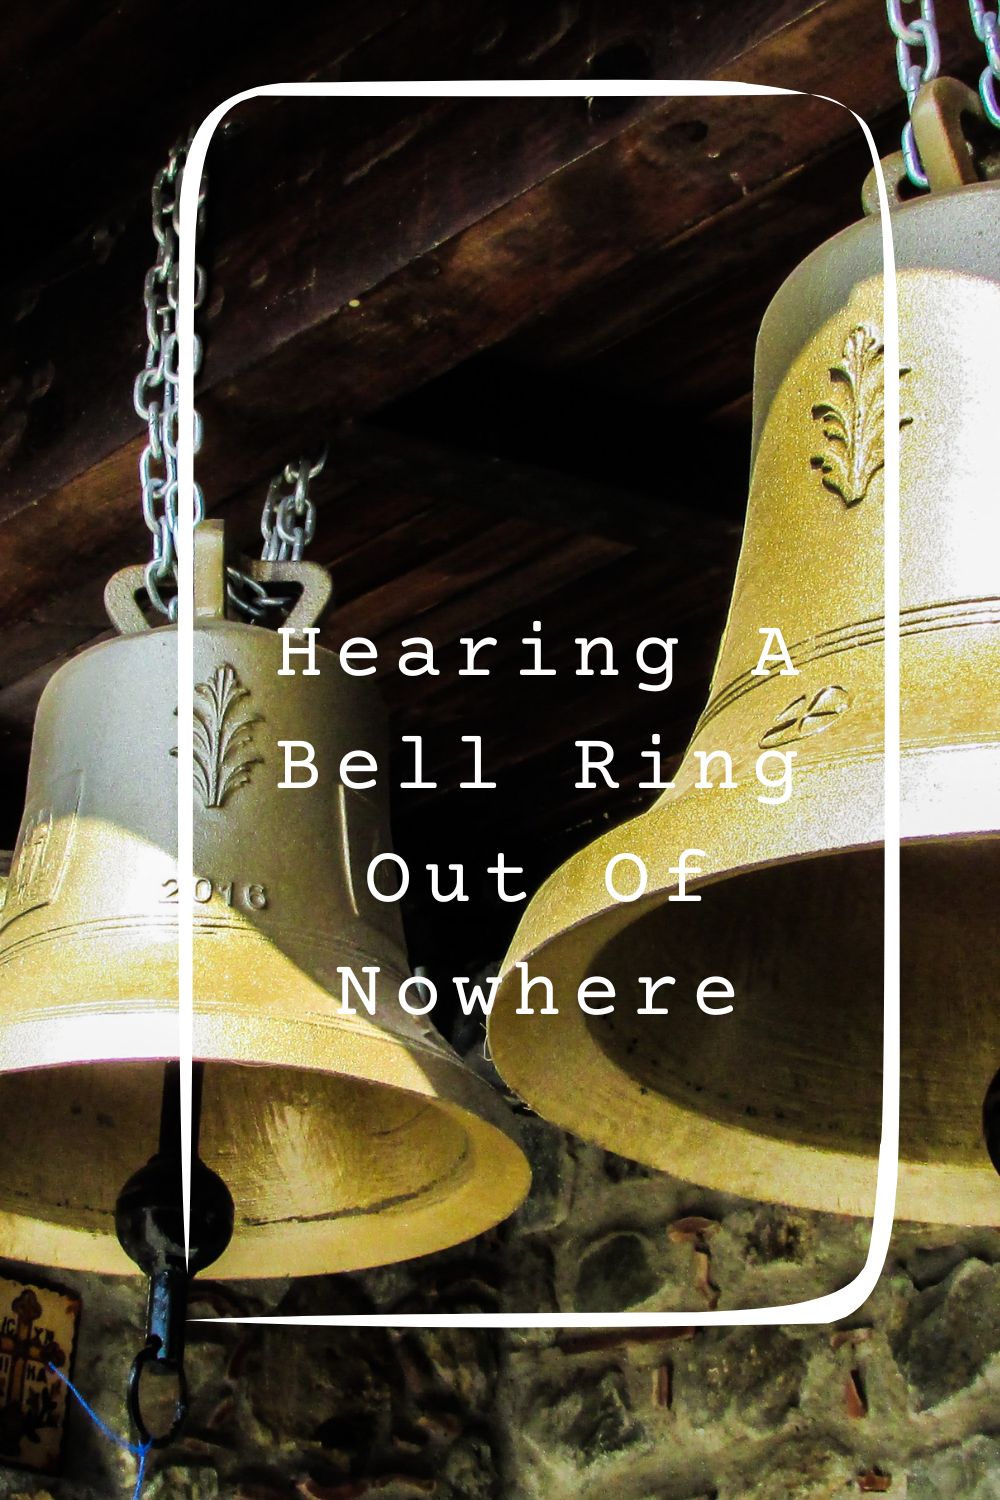 Bell Ringing Ritual: Wedding Wands and More - The Urban Wedding Company